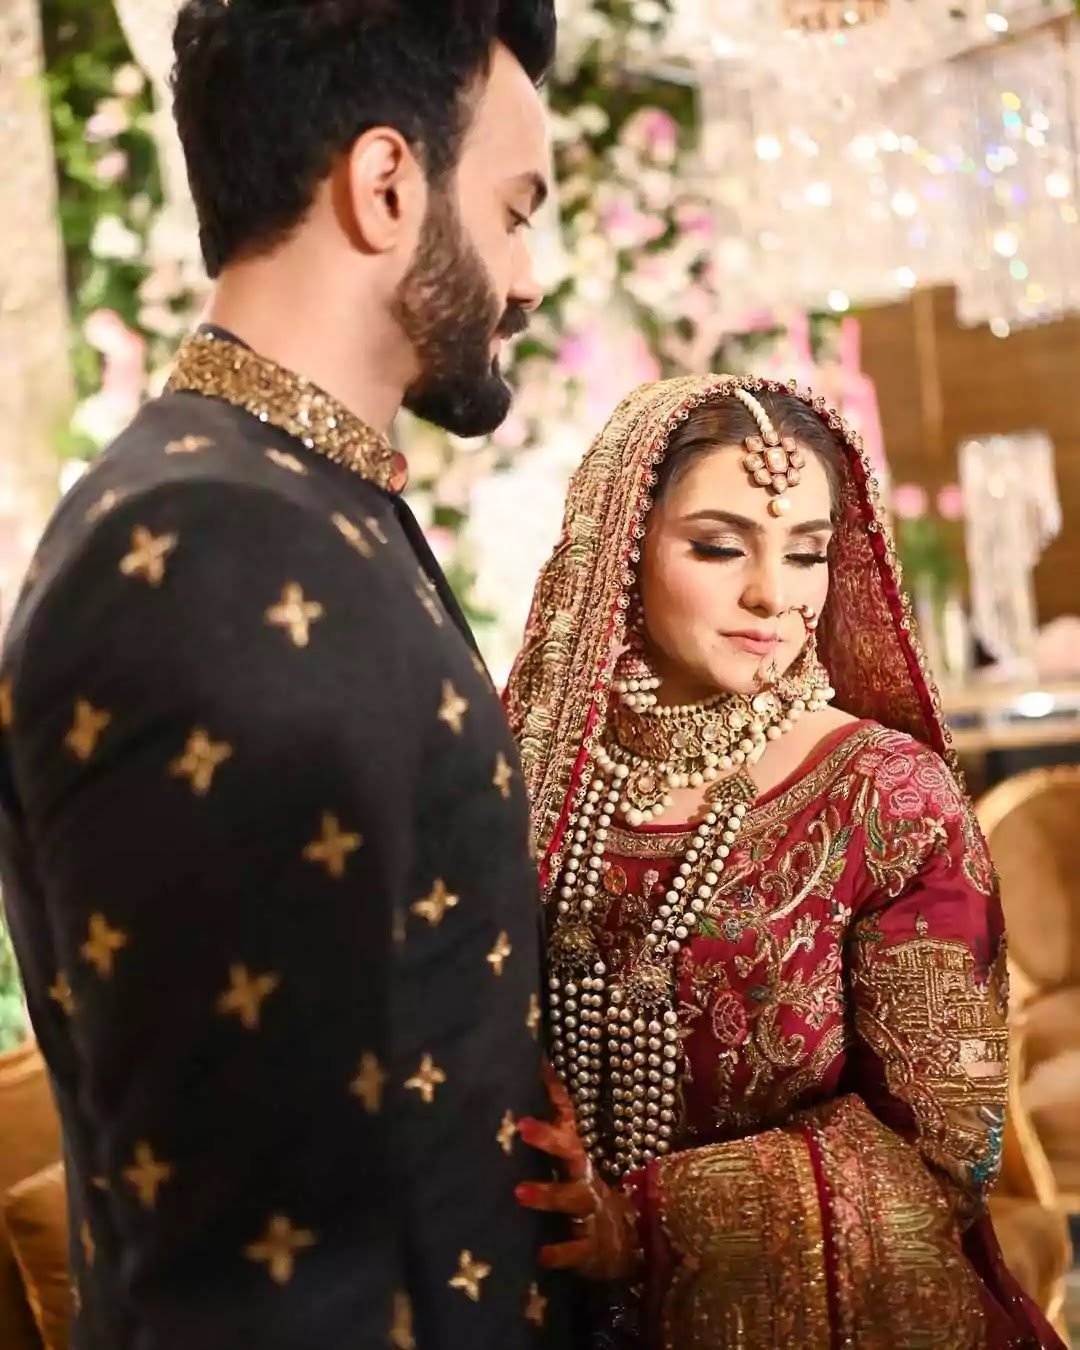 Komal Baig Wedding Pictures With Her Husband